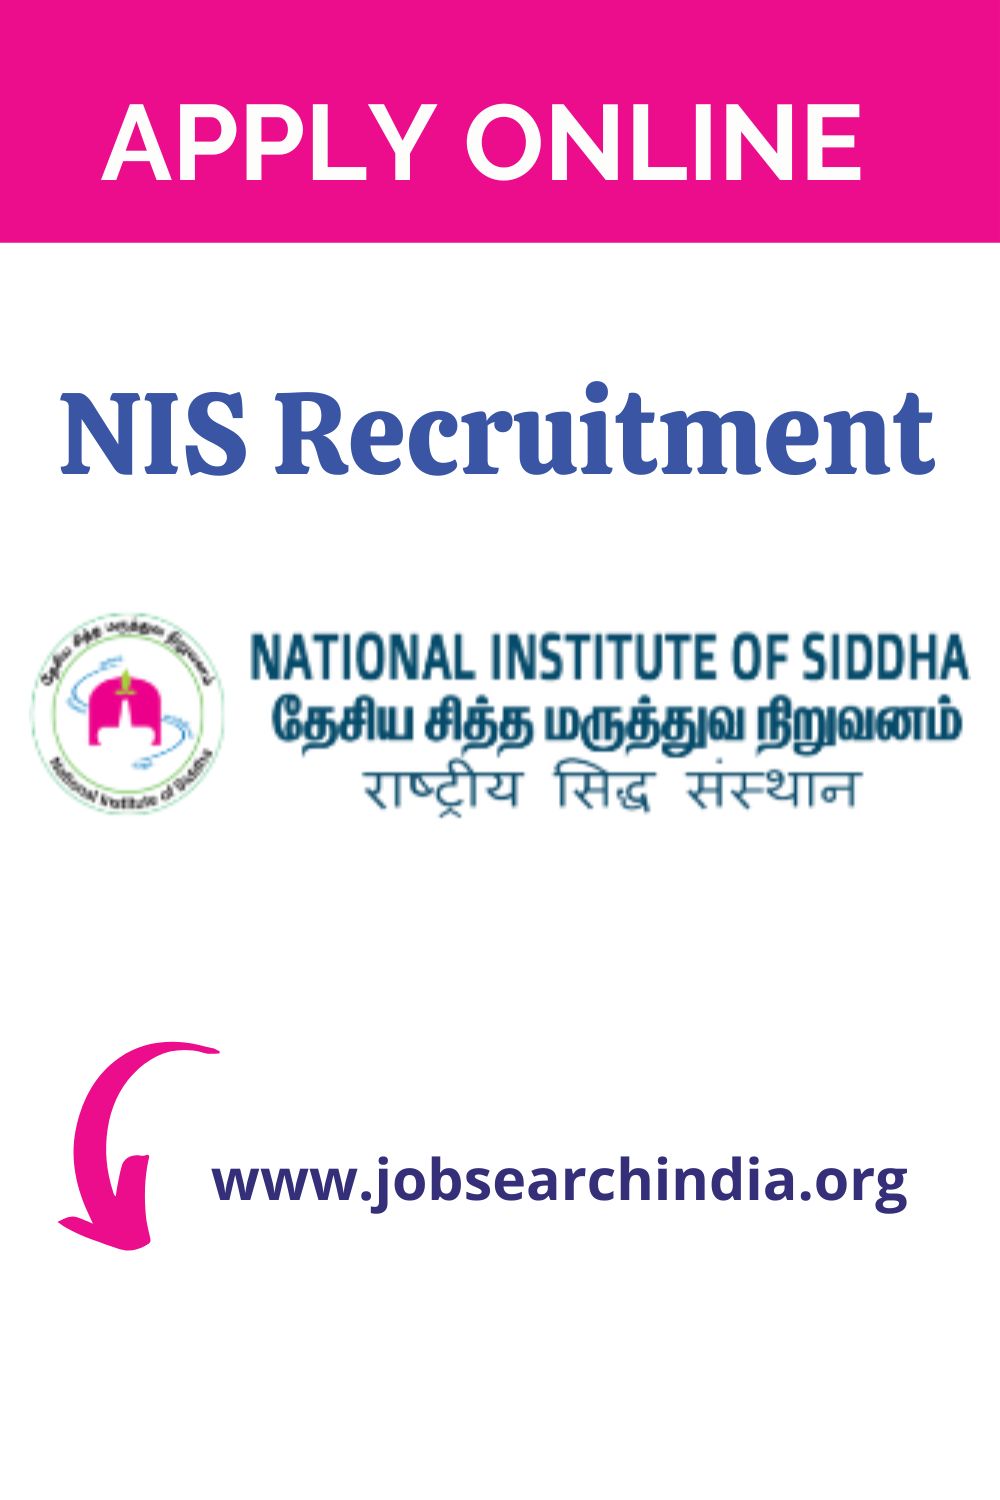 National Institute Of Siddha